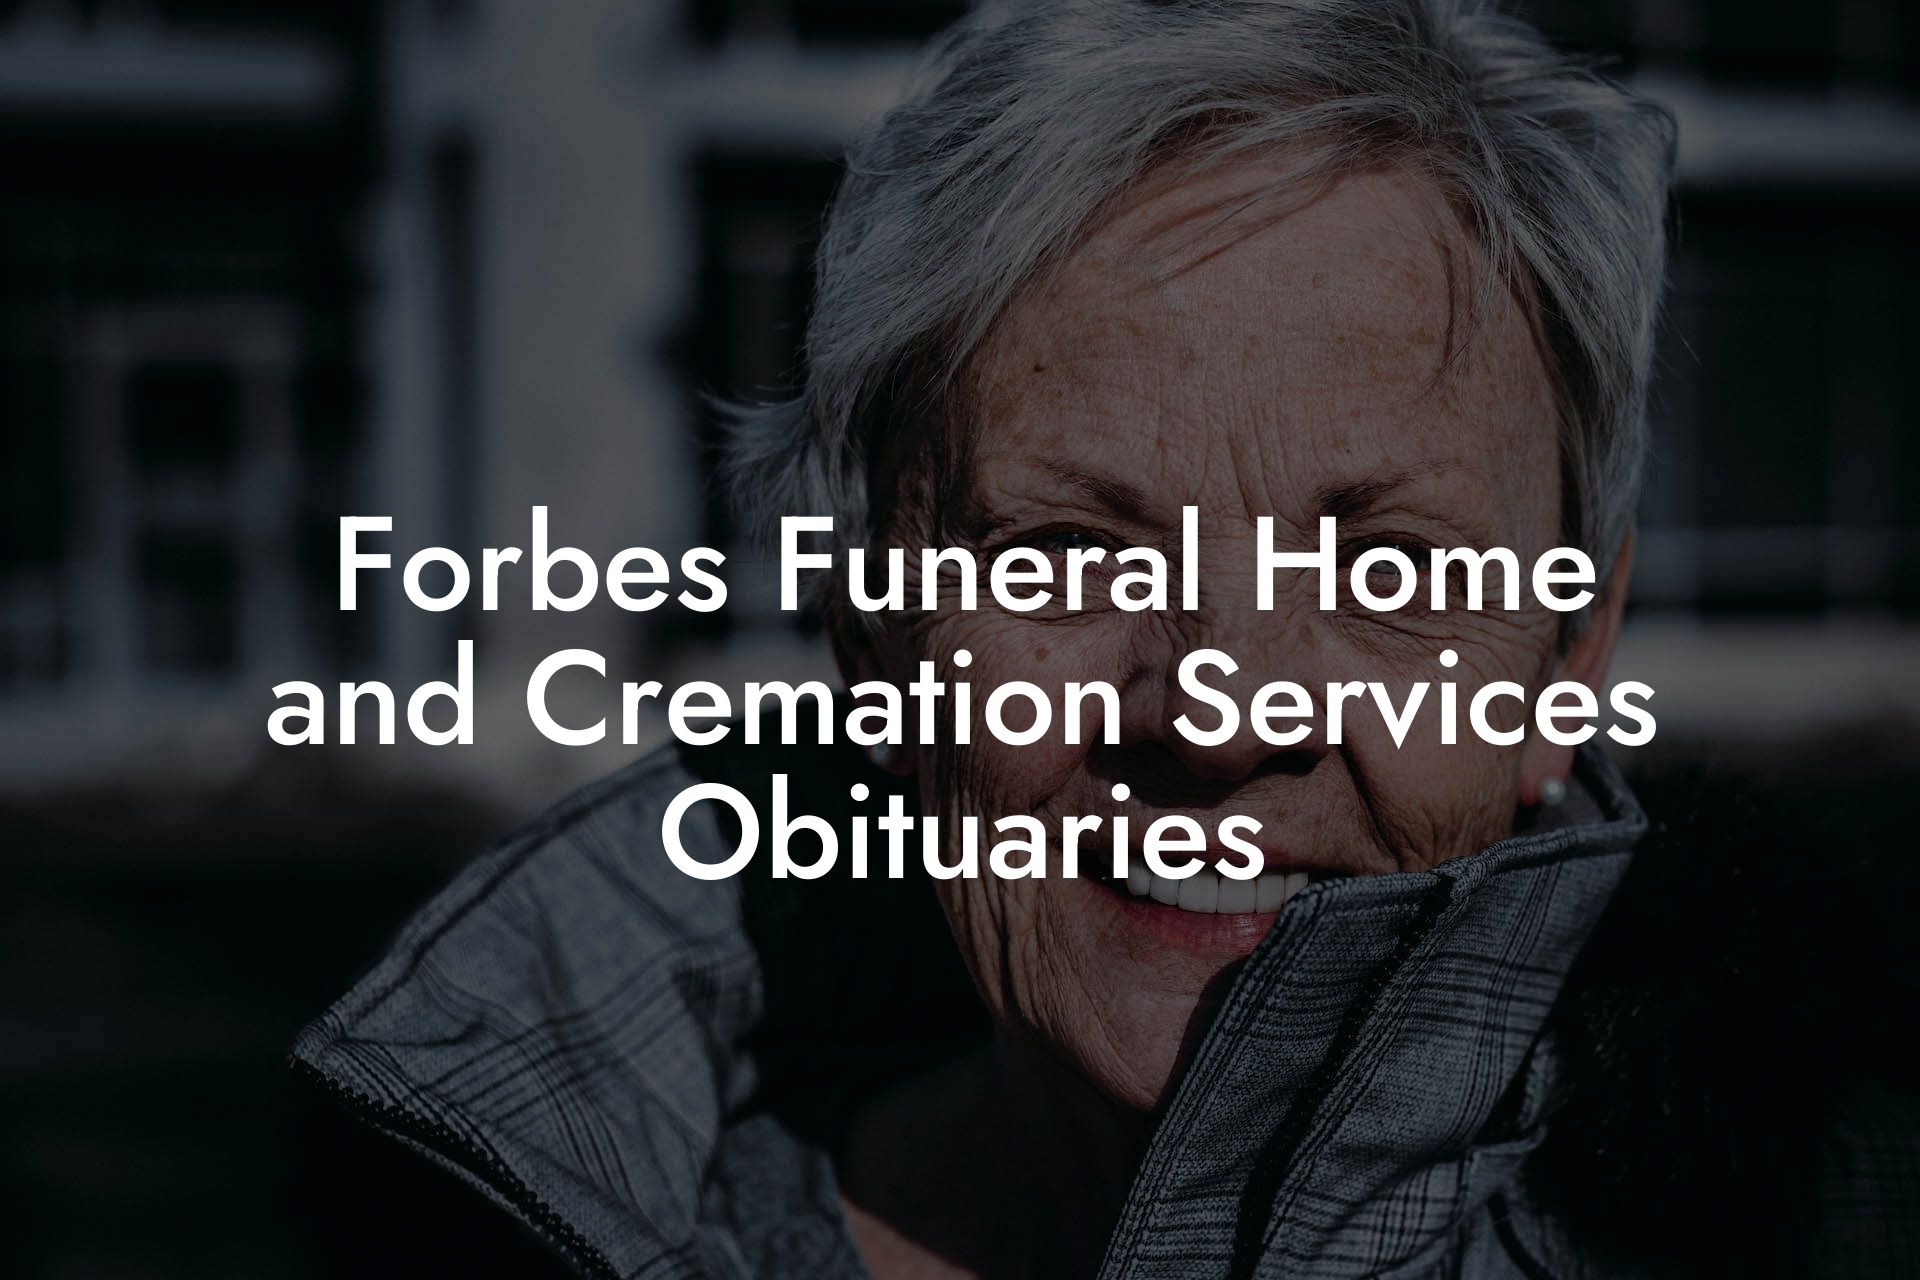 Forbes Funeral Home and Cremation Services Obituaries